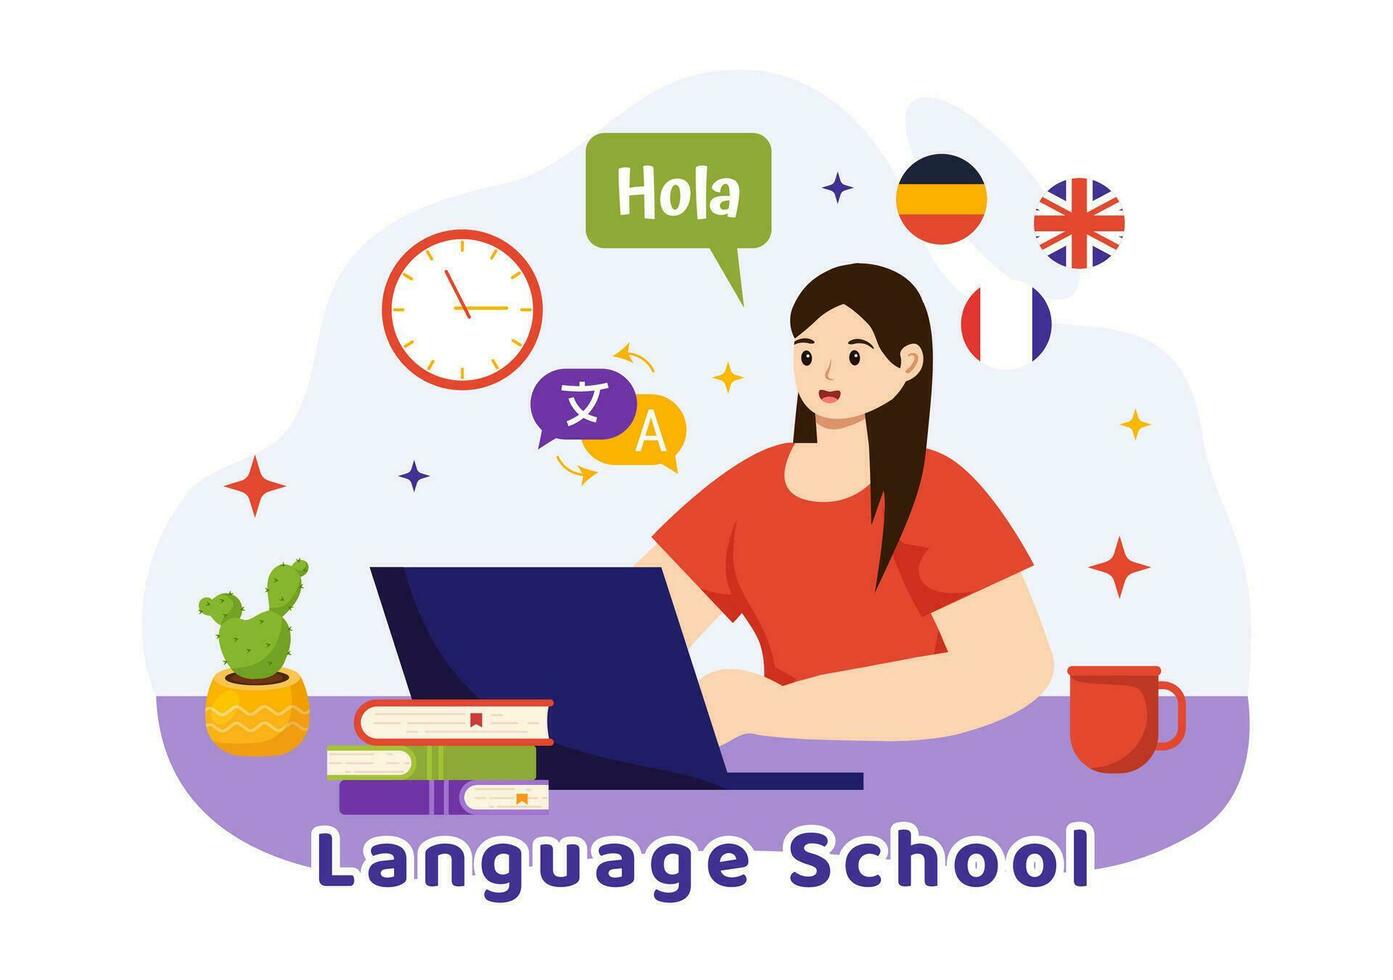 Language School Vector Illustration of Online Learning, Courses, Training Program and Study Foreign Hallo Languages Abroad in Flat Background